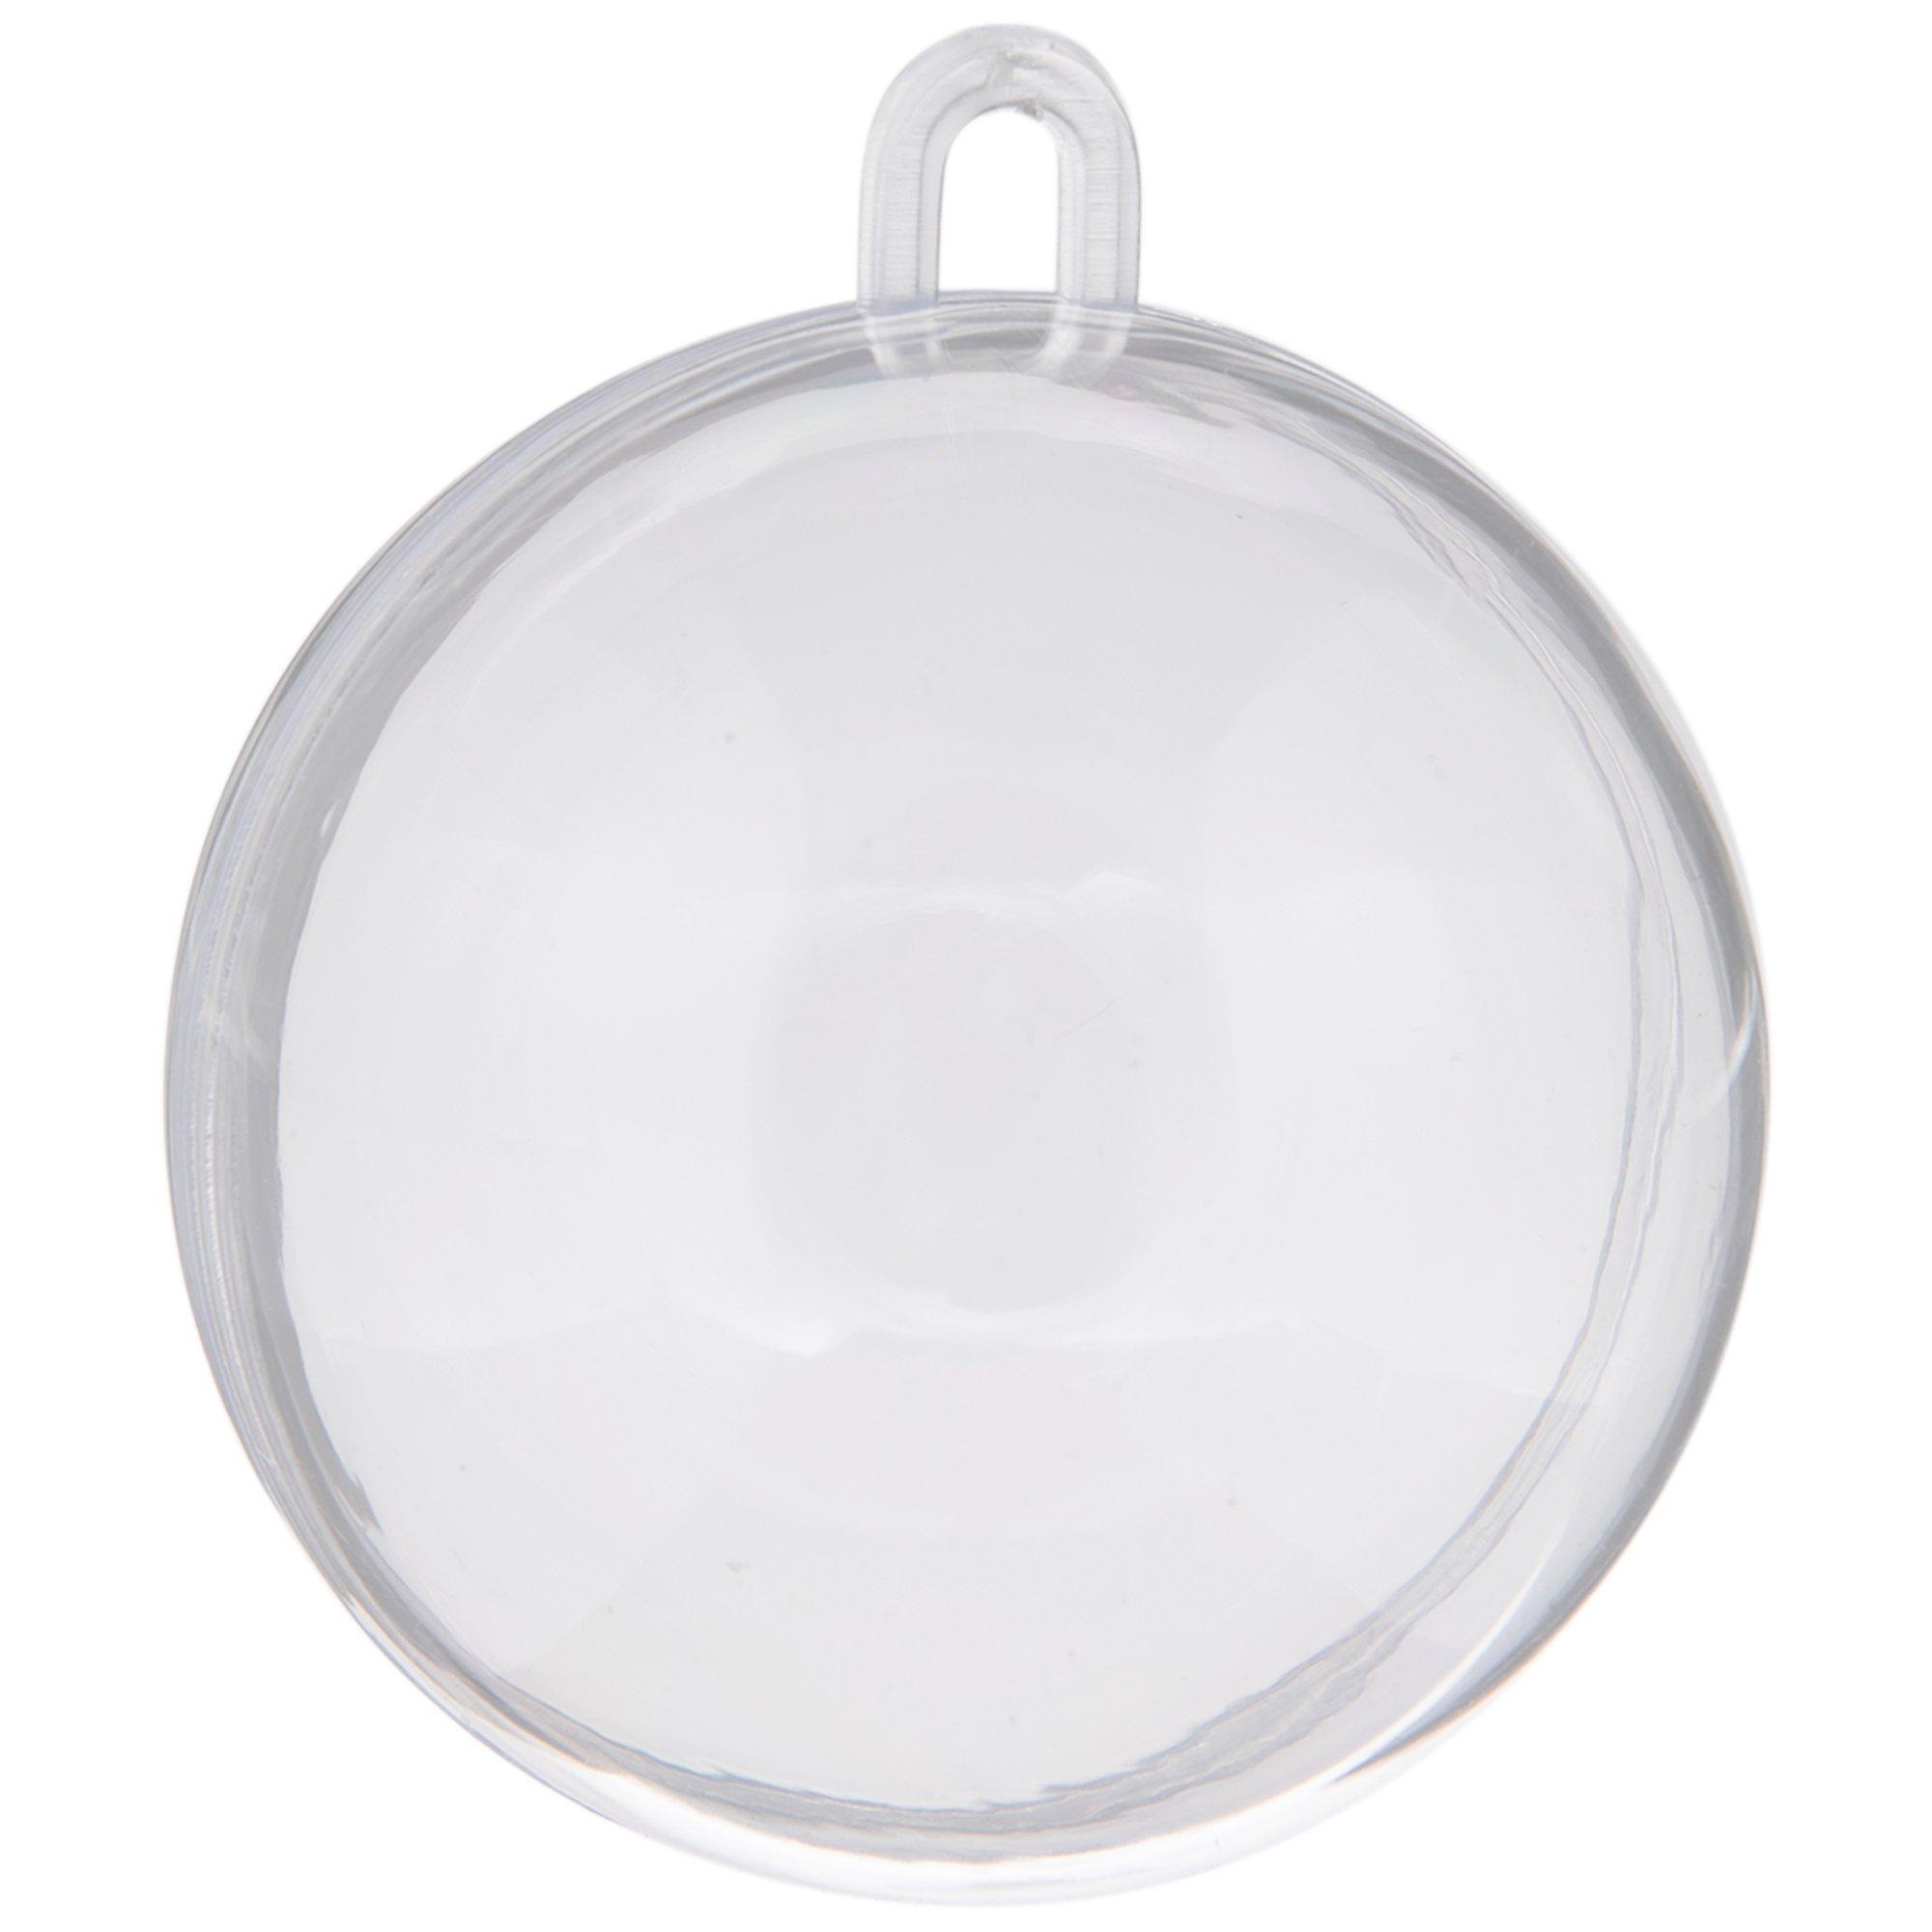 Craft DIY Clear Plastic Ornament with Aluminum Lid, 3-Inch 